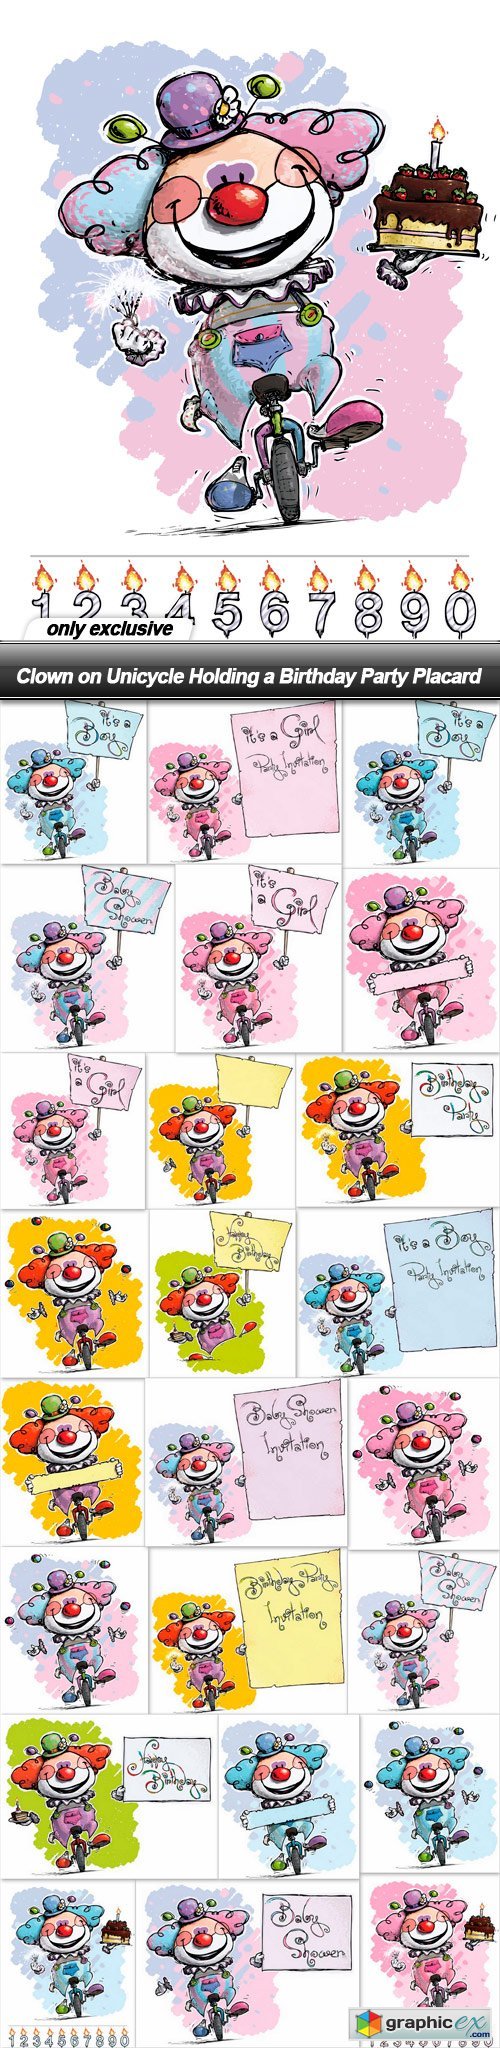 Clown on Unicycle Holding a Birthday Party Placard - 25 EPS